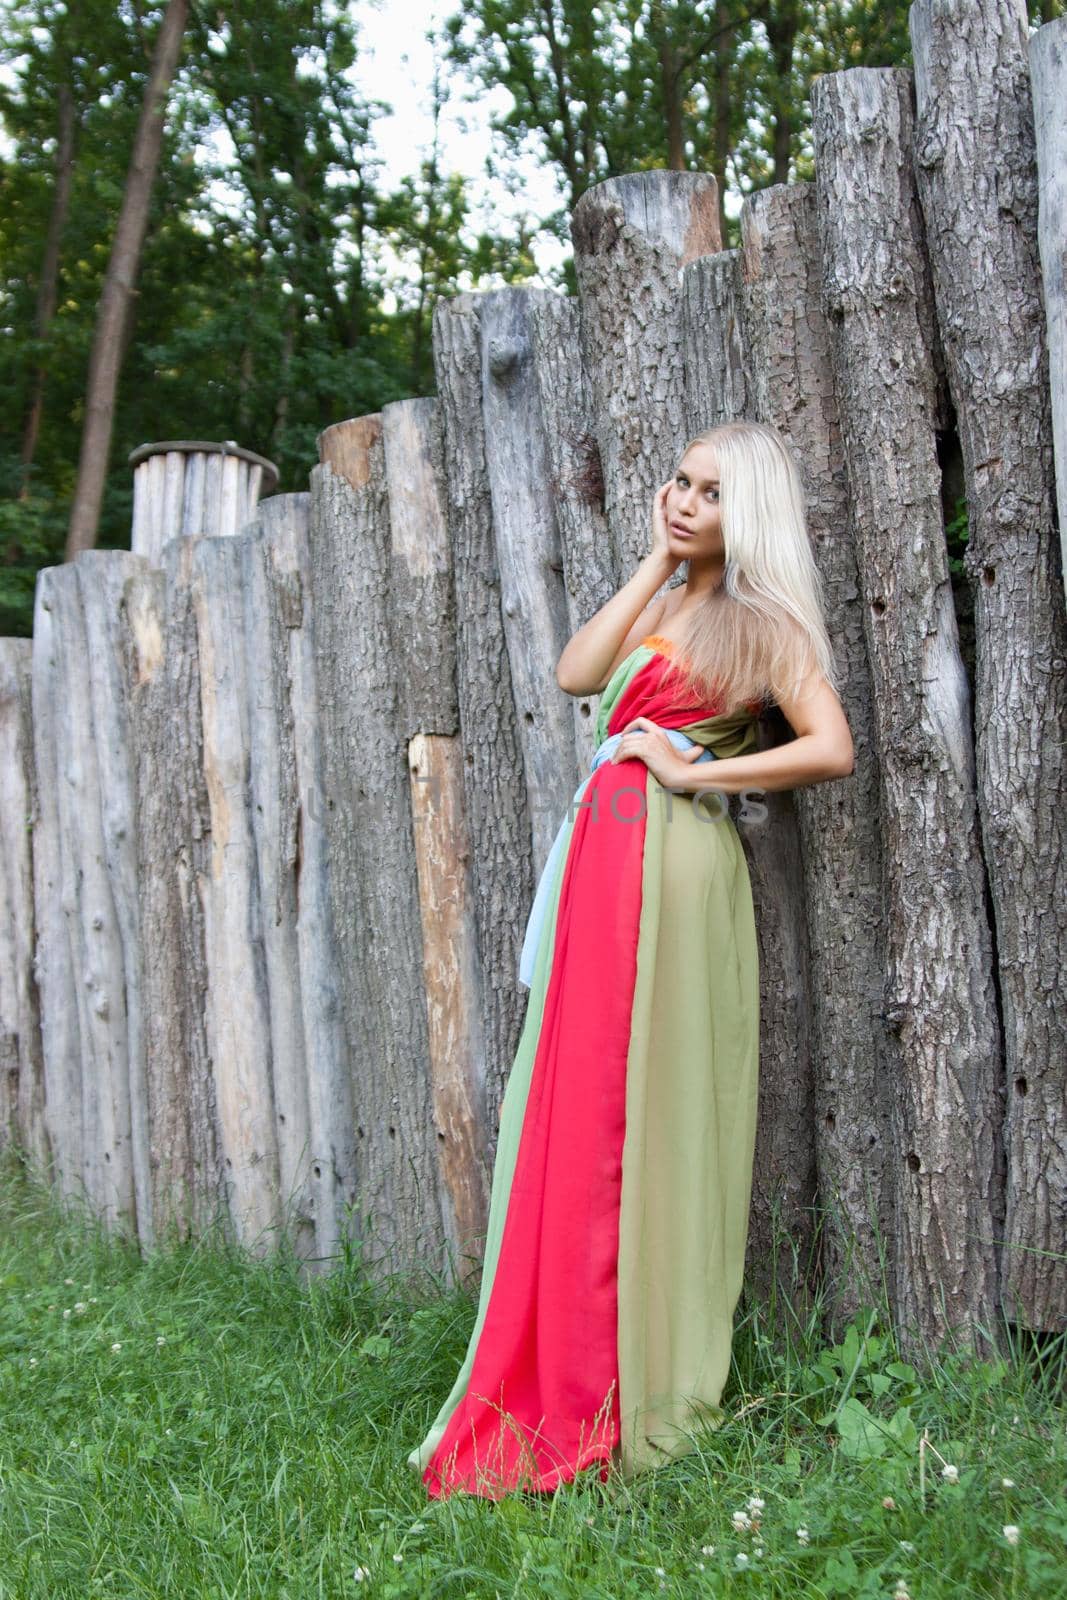 Sexy woman outdoor with nice colorful dress by Julenochek